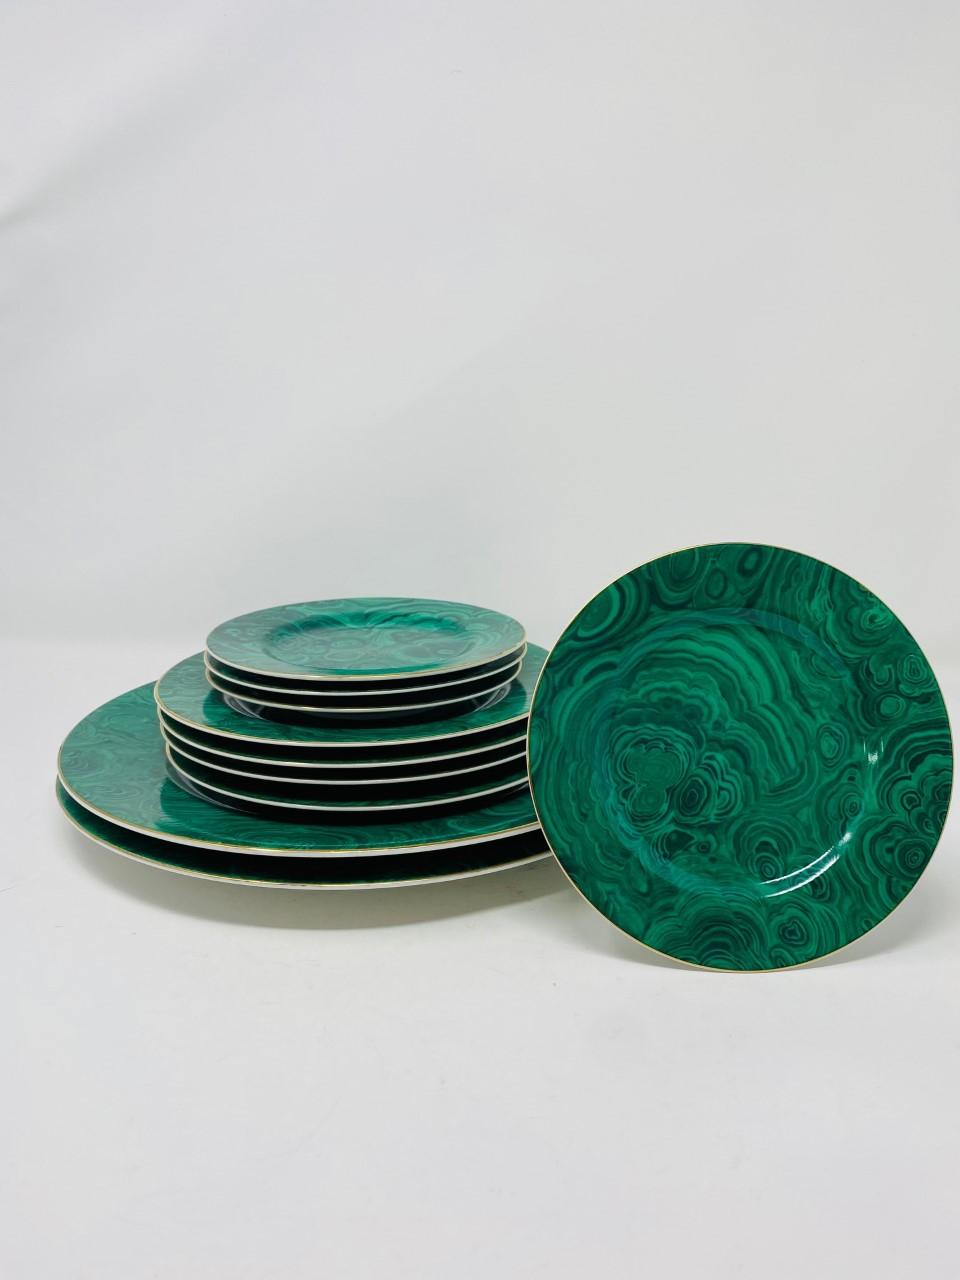 Hand-Crafted Vintage 1970s Neiman Marcus Malachite Porcelain Plates 'Set of 10'